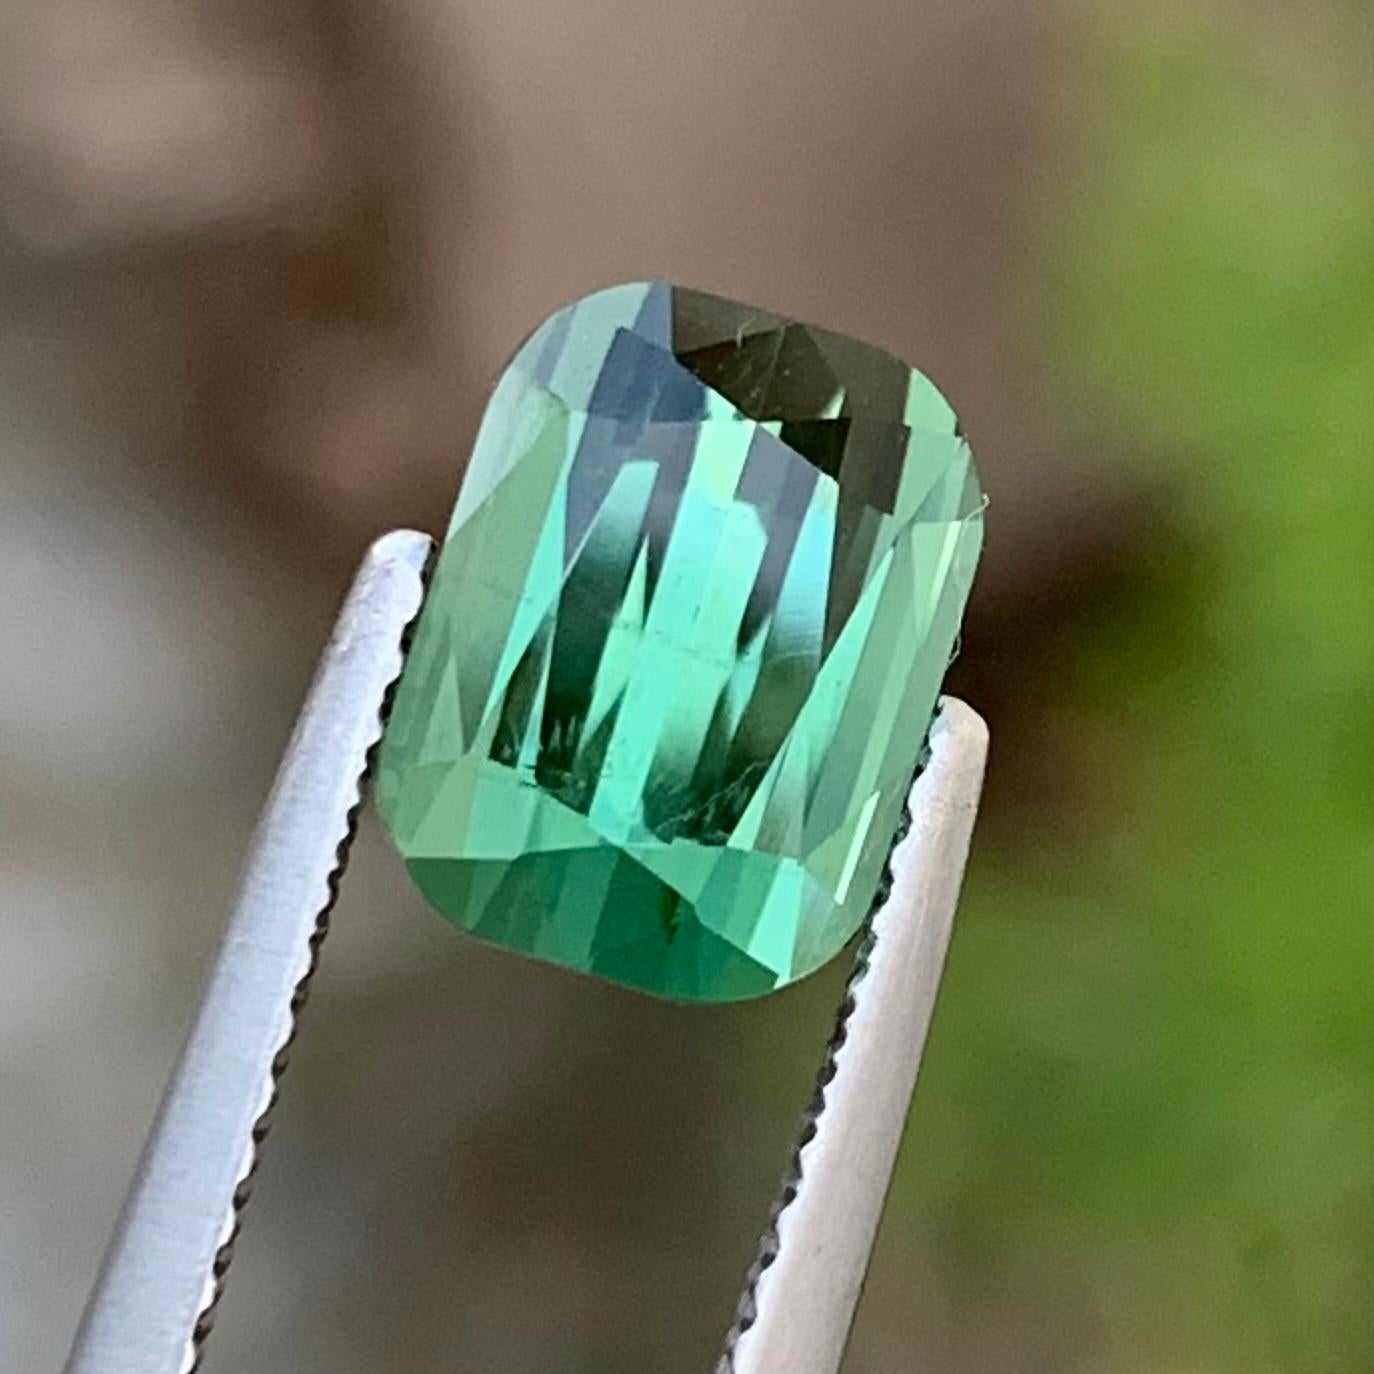 Loose Lagoon Shade Tourmaline

Weight: 2.60 Carats
Dimension: 8.6 x 6.4 x 5.3 Mm
Colour: lagoon 
Origin: Afghanistan
Certificate: On Demand
Treatment: Non

Tourmaline is a captivating gemstone known for its remarkable variety of colors, making it a